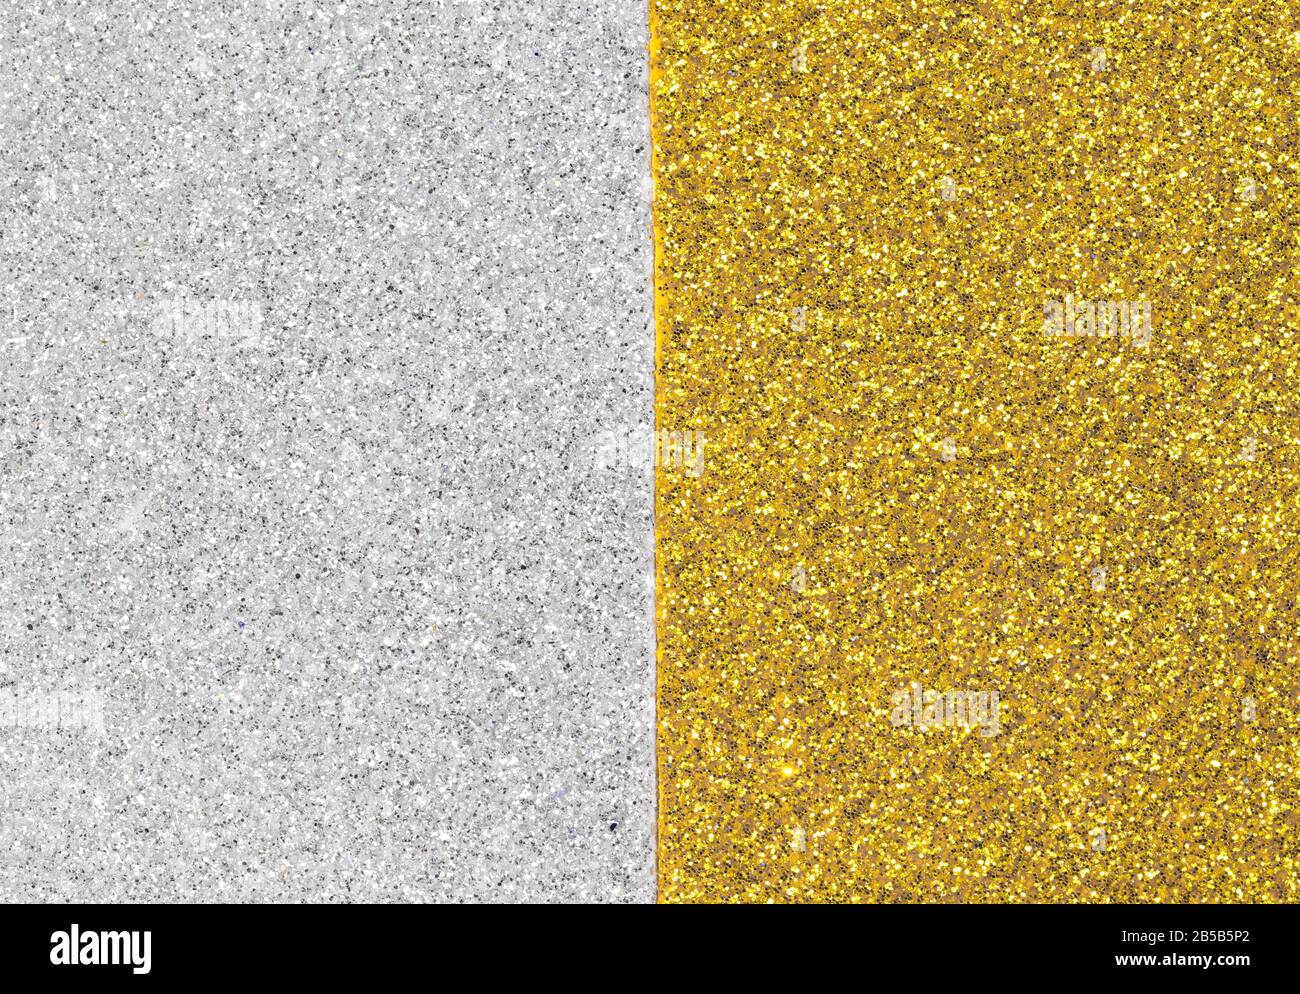 Background Of Shimmering Glitter Half Golden And Half Silver Ideal For Decoration Or As A Backdrop Stock Photo Alamy